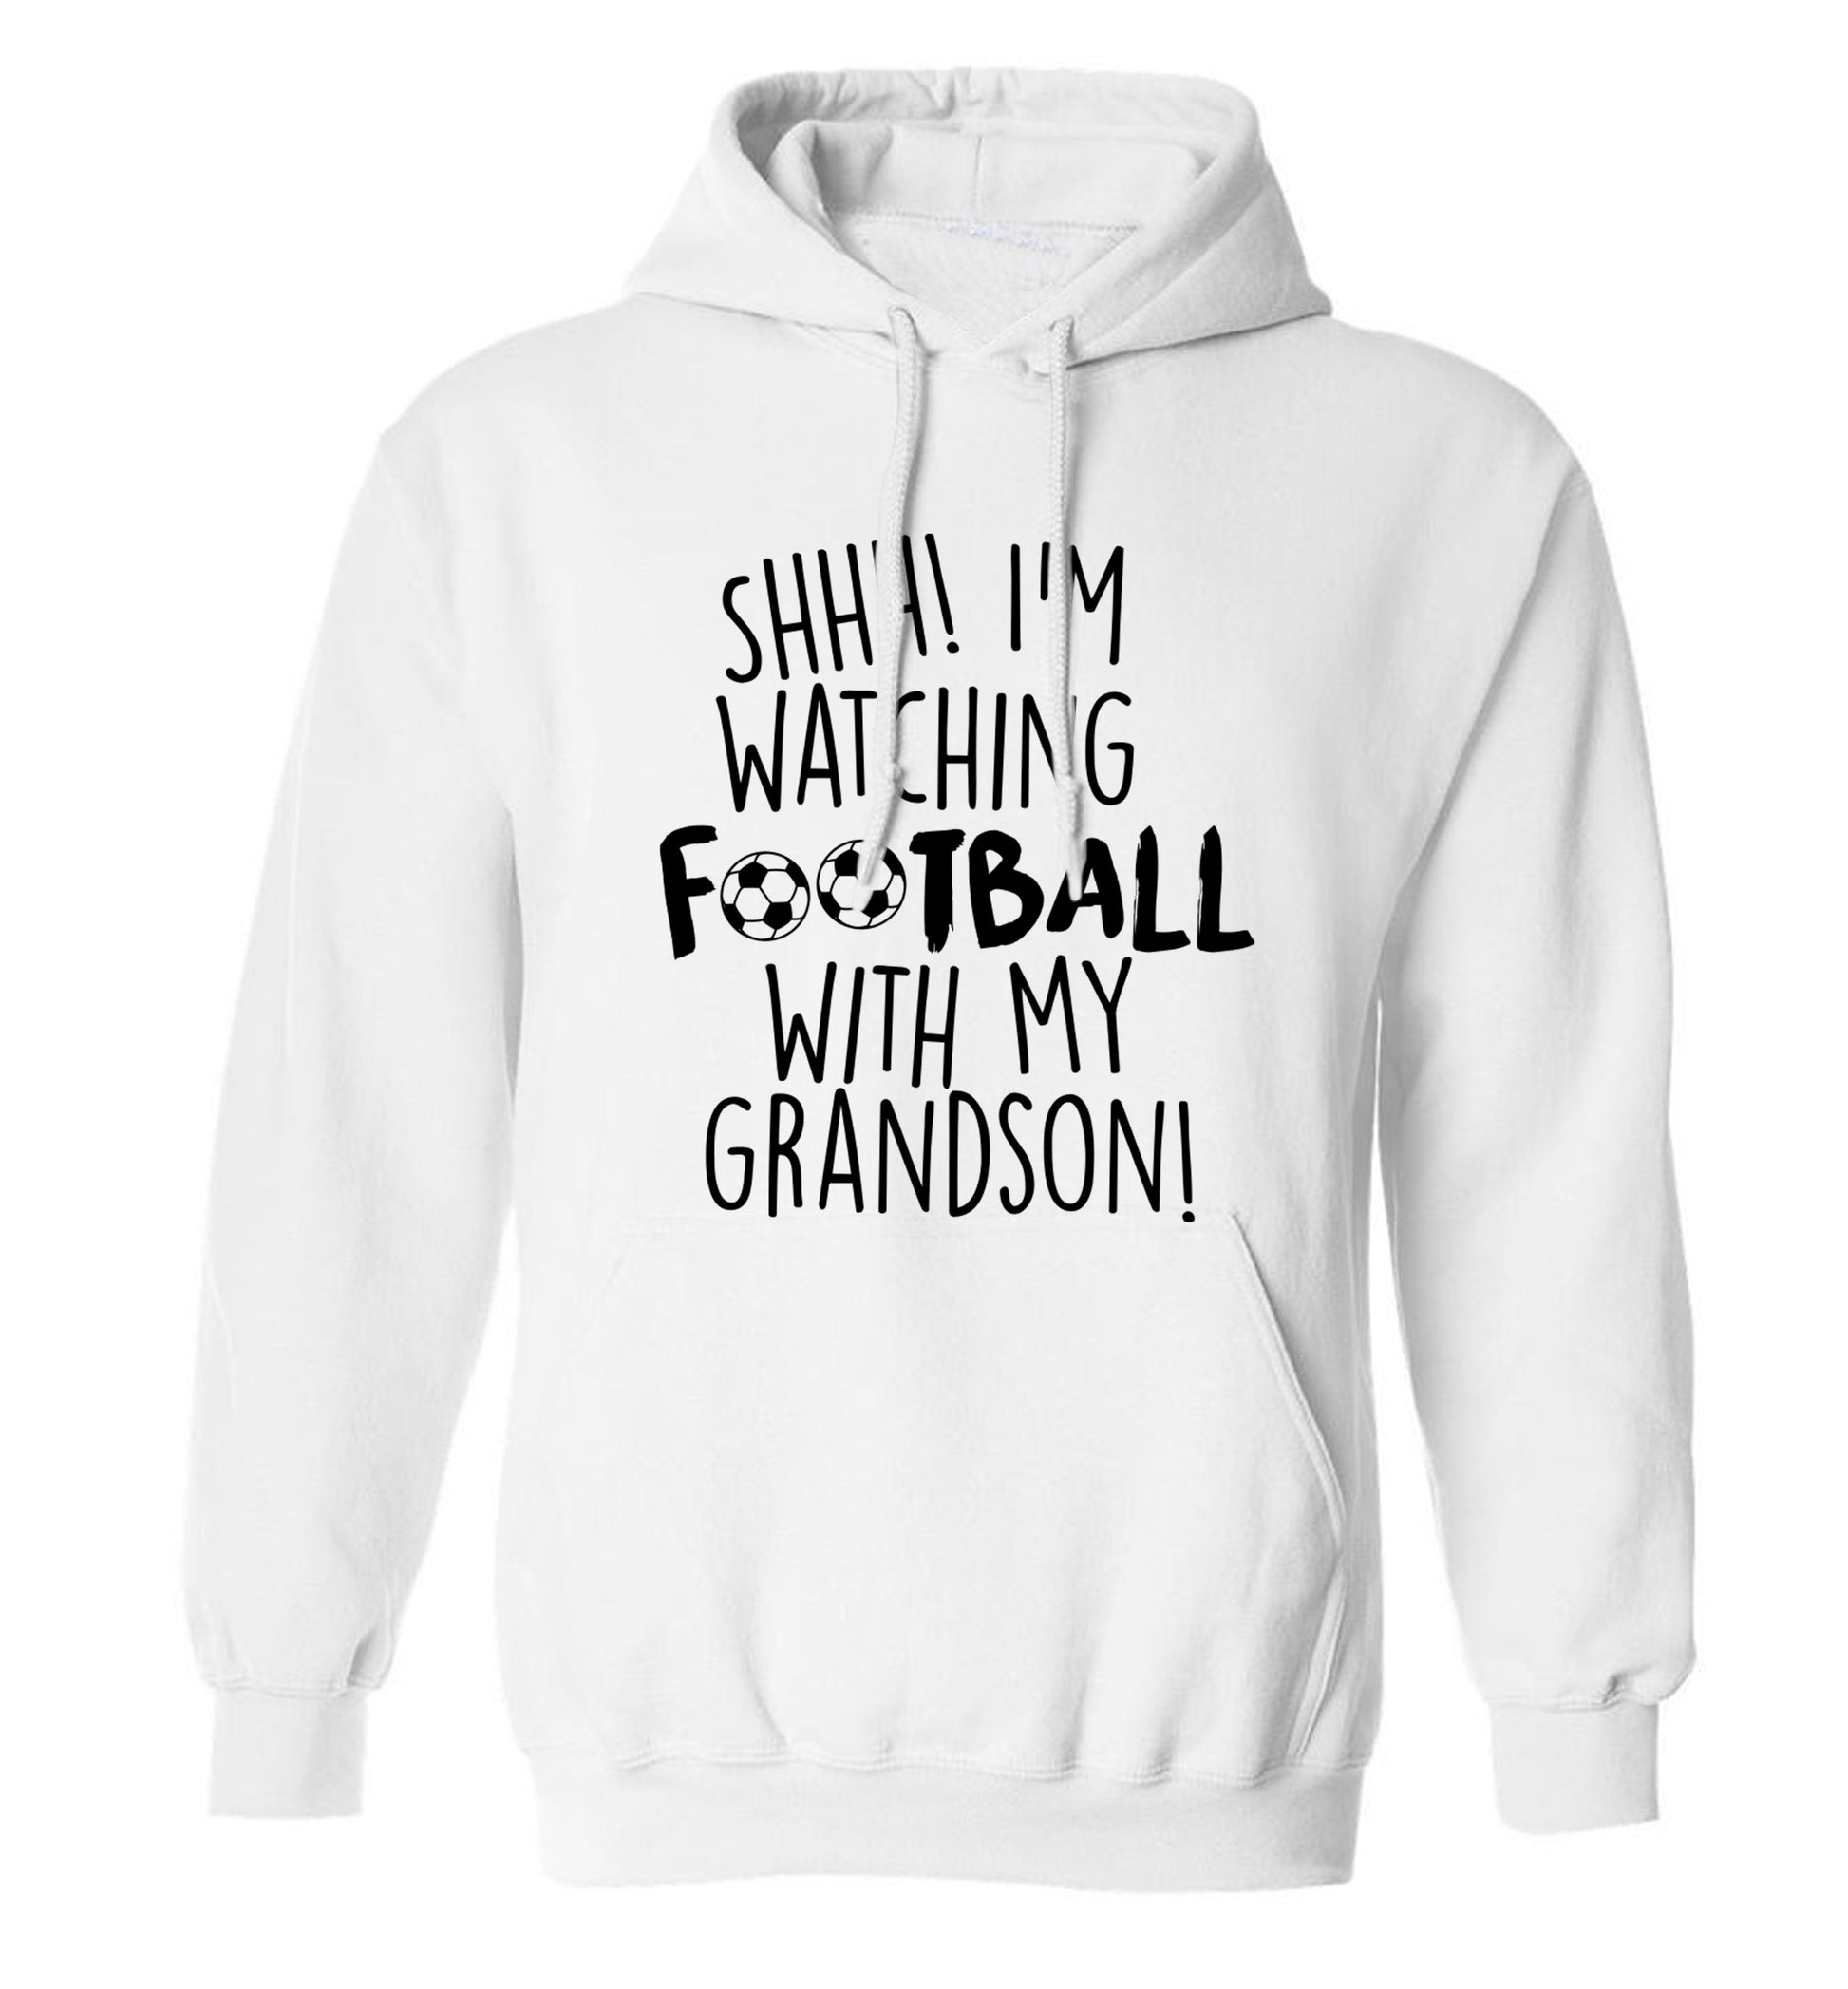 Shhh I'm watching football with my grandson adults unisexwhite hoodie 2XL